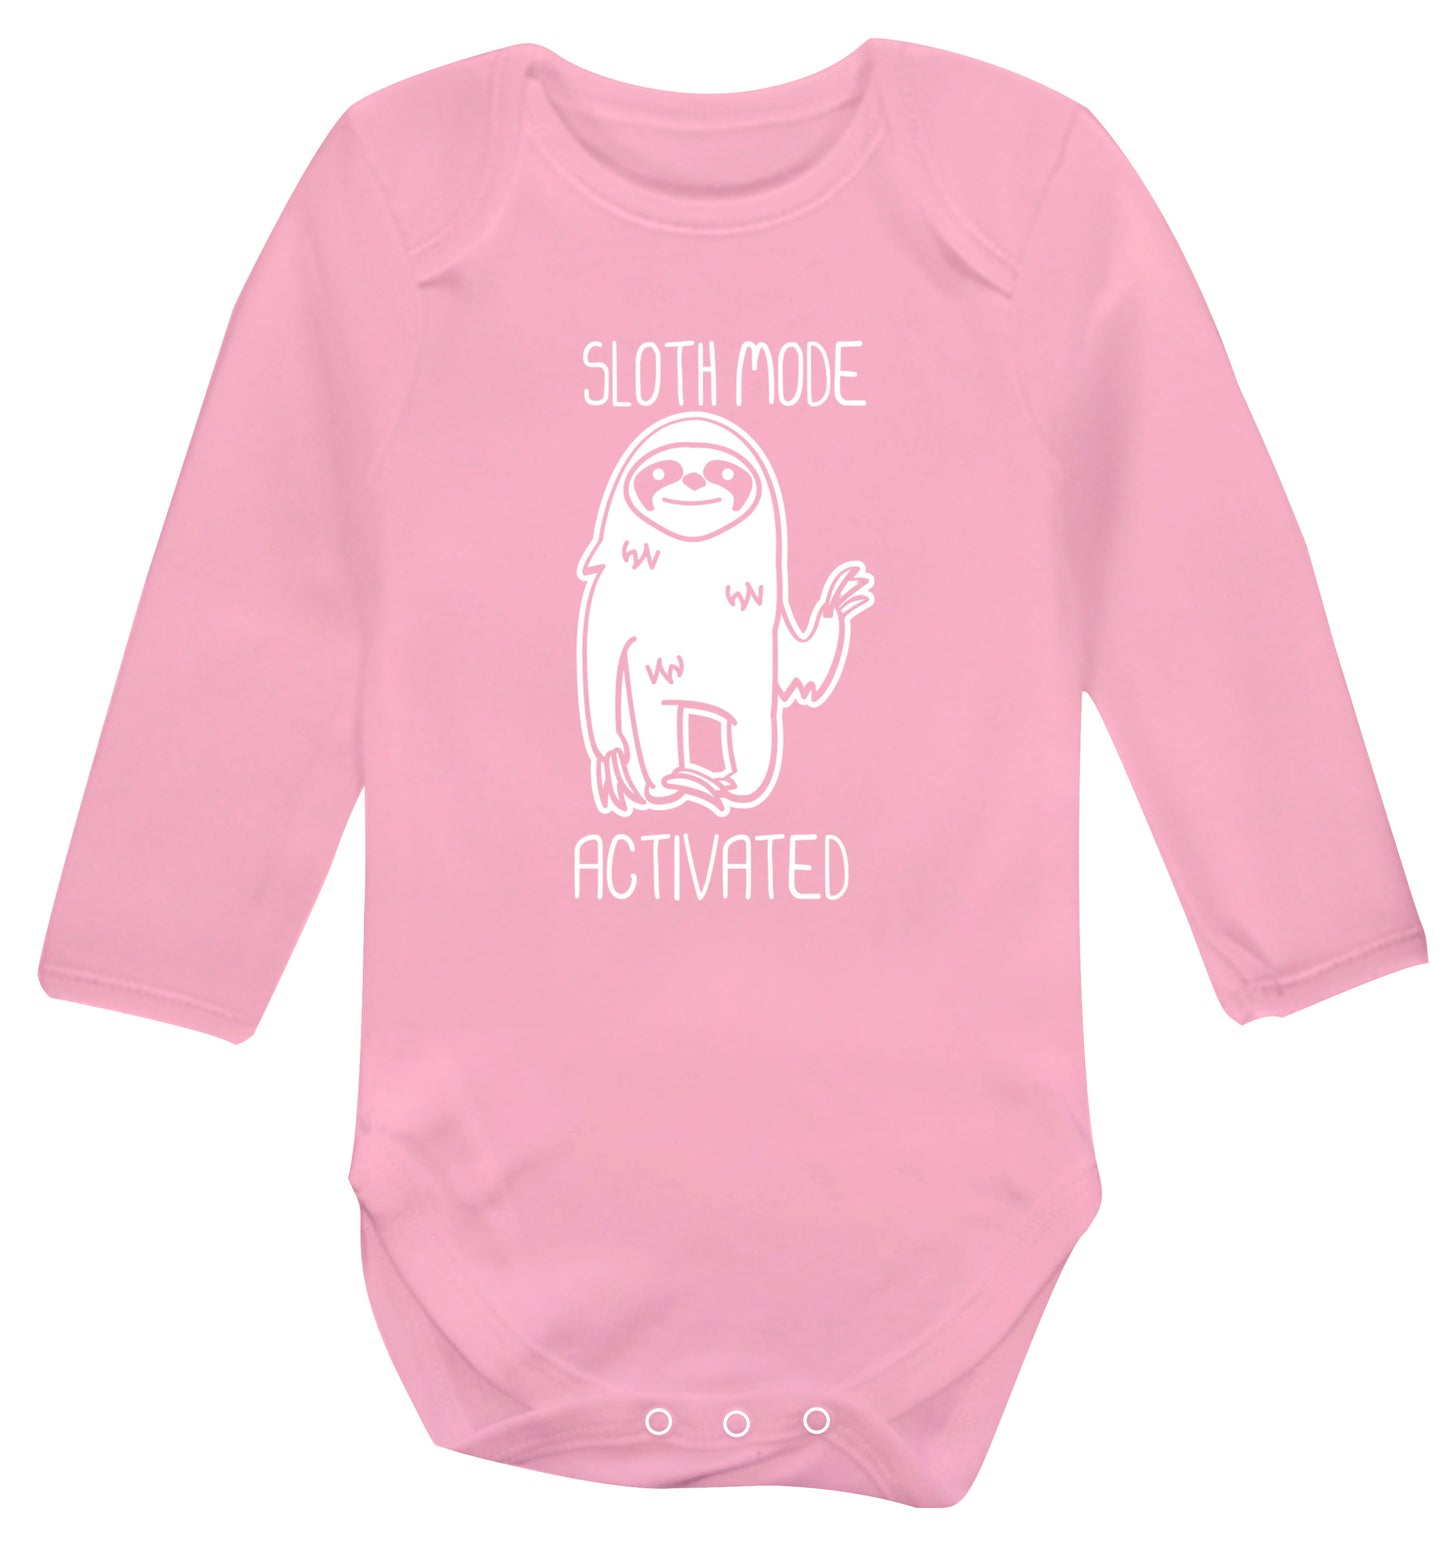 Sloth mode acitvated Baby Vest long sleeved pale pink 6-12 months